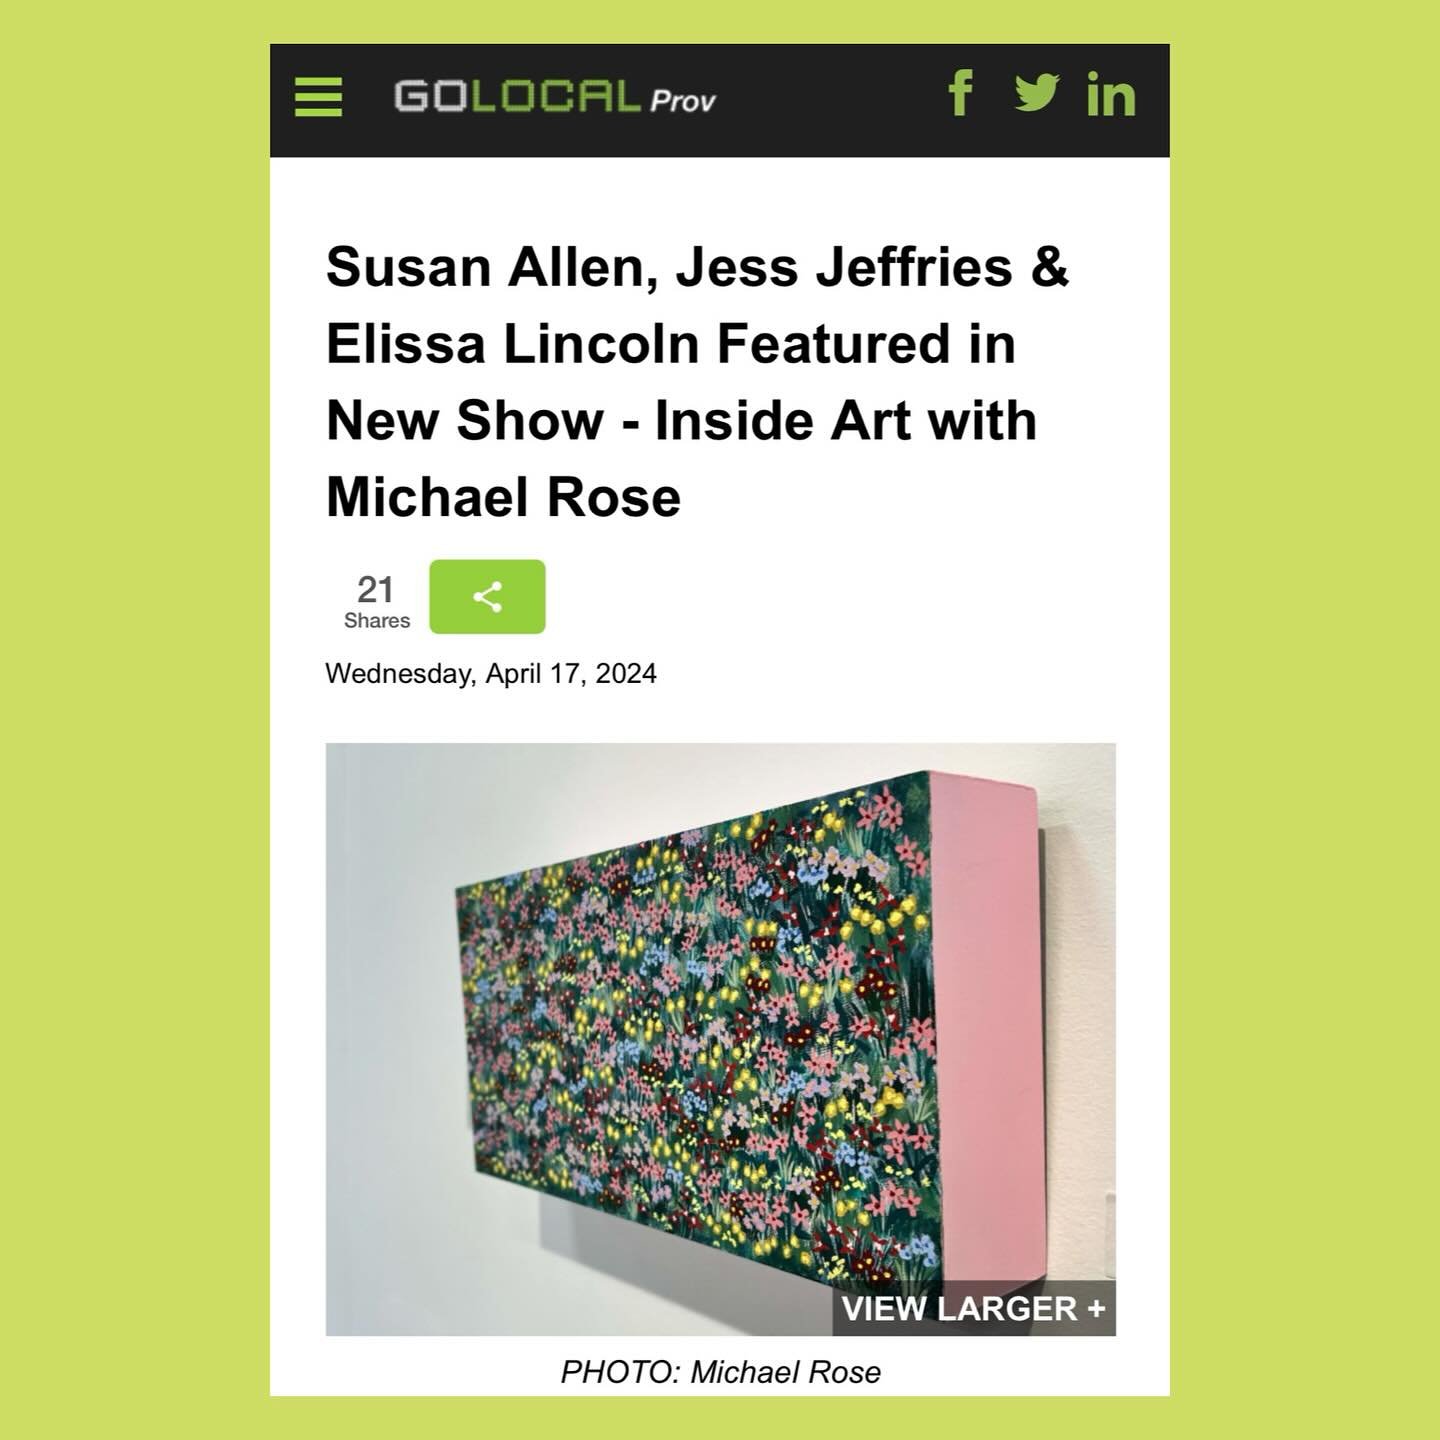 Fresh off the press! 🗞️
Thank you for the wonderful article in GoLocal Prov @michaelrosefineart!

@drydengallery&rsquo;s latest show, Garden Party, is on view and in full bloom 💐
A huge congratulations to our artists and curator @lizzkelley!

You c